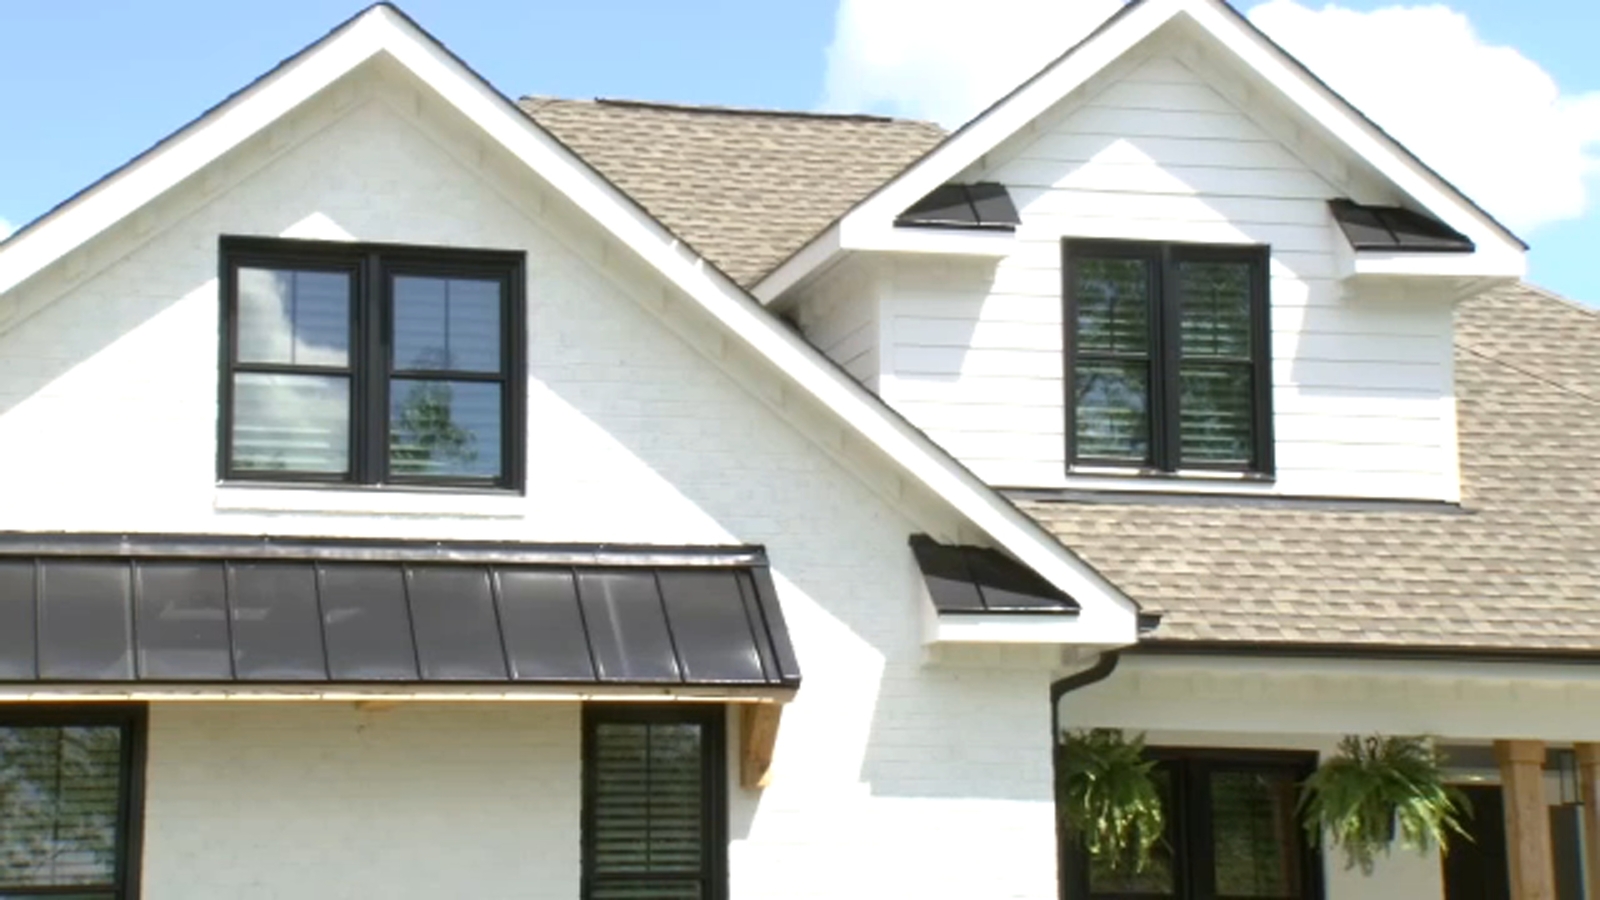 Lowe’s Home Improvement: Newly installed windows immediately sent energy bill through the roof for Willow Spring homeowner [Video]